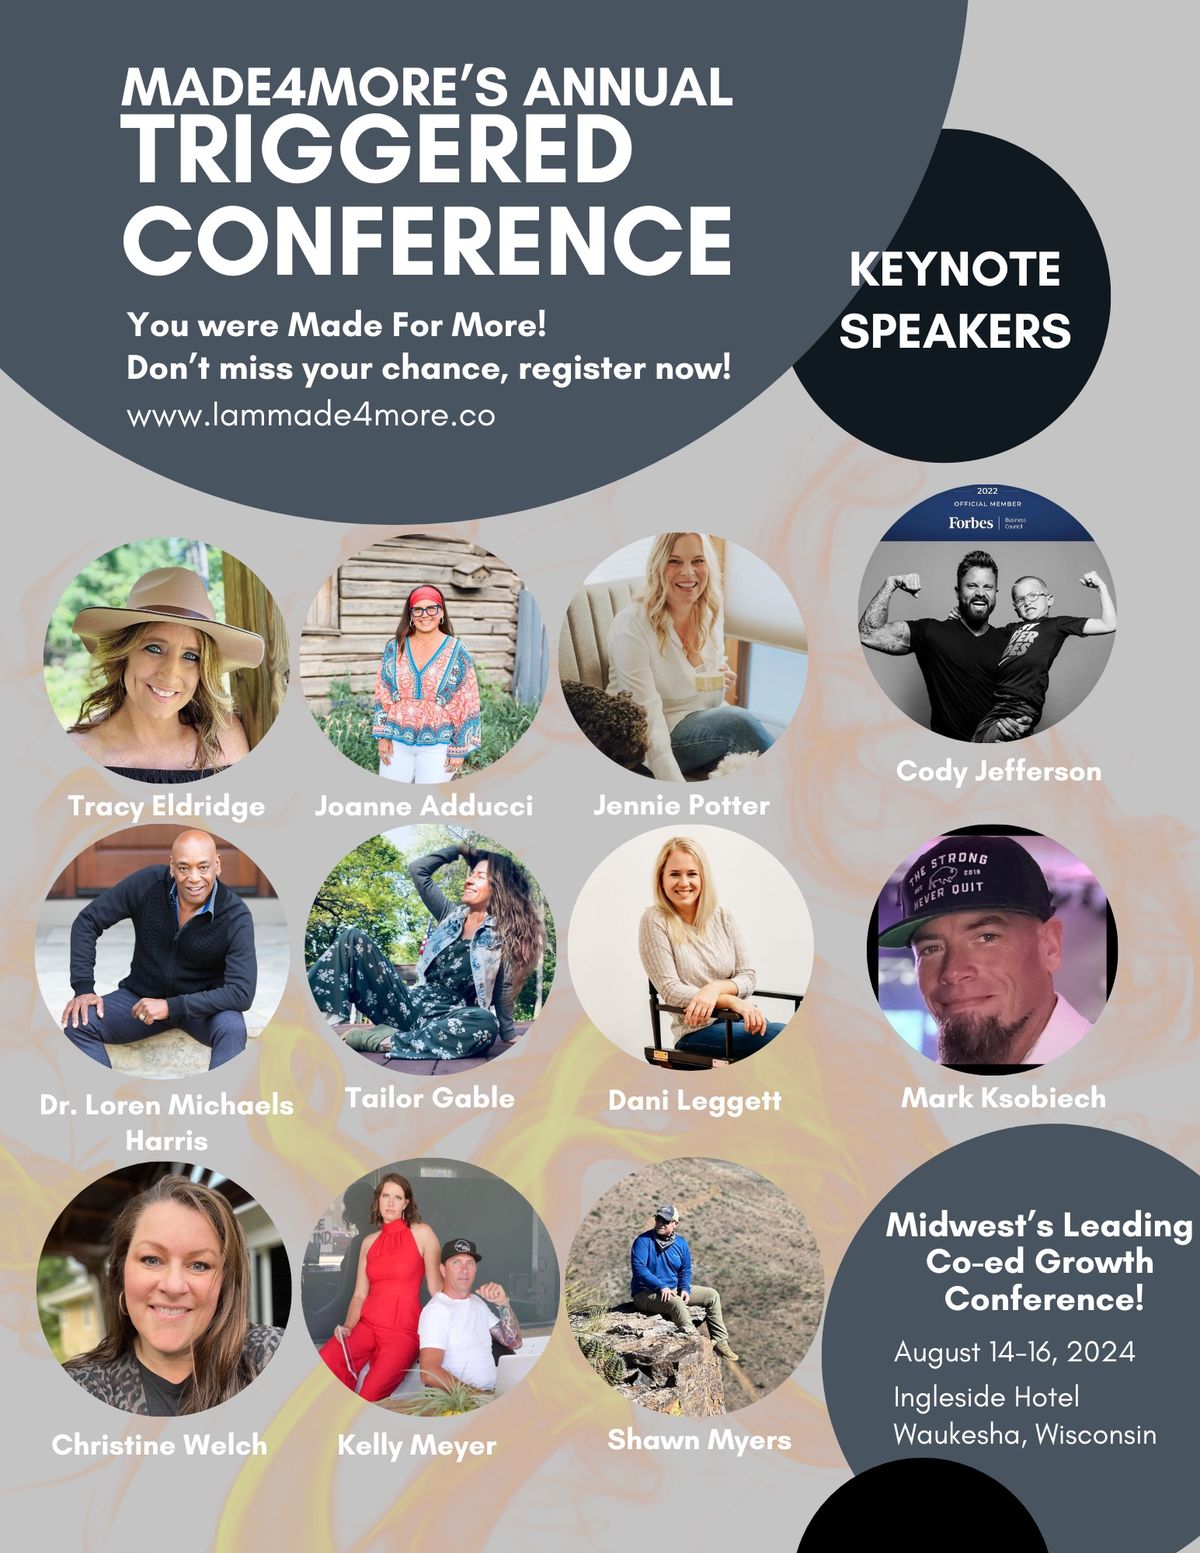 Made4More's TRIGGERED Conference